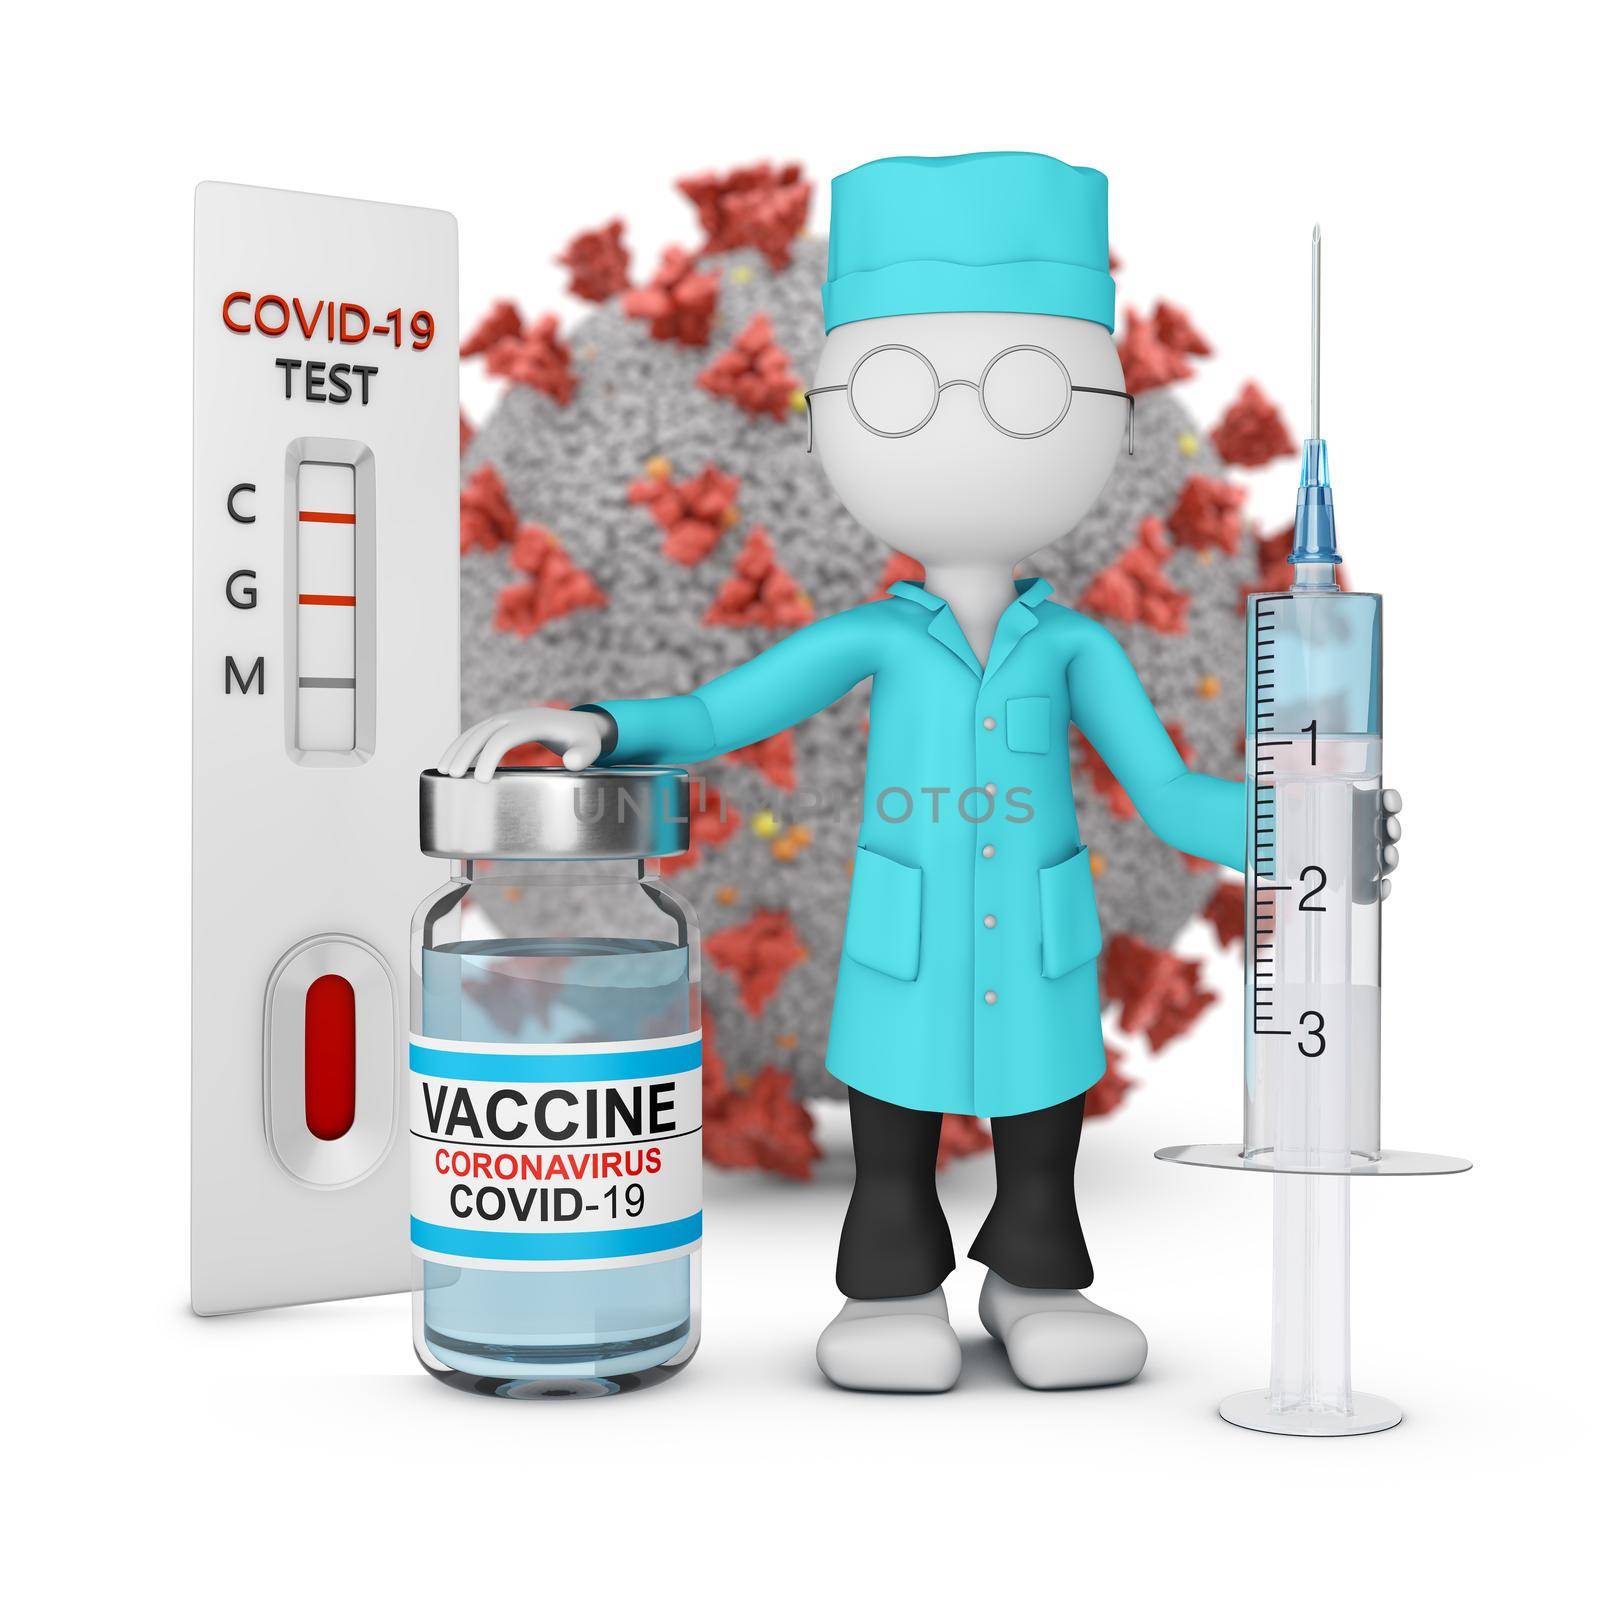 A doctor in a lab coat with a syringe and a vaccine stands next to an express test against the backdrop of a coronavirus molecule. 3D rendering.